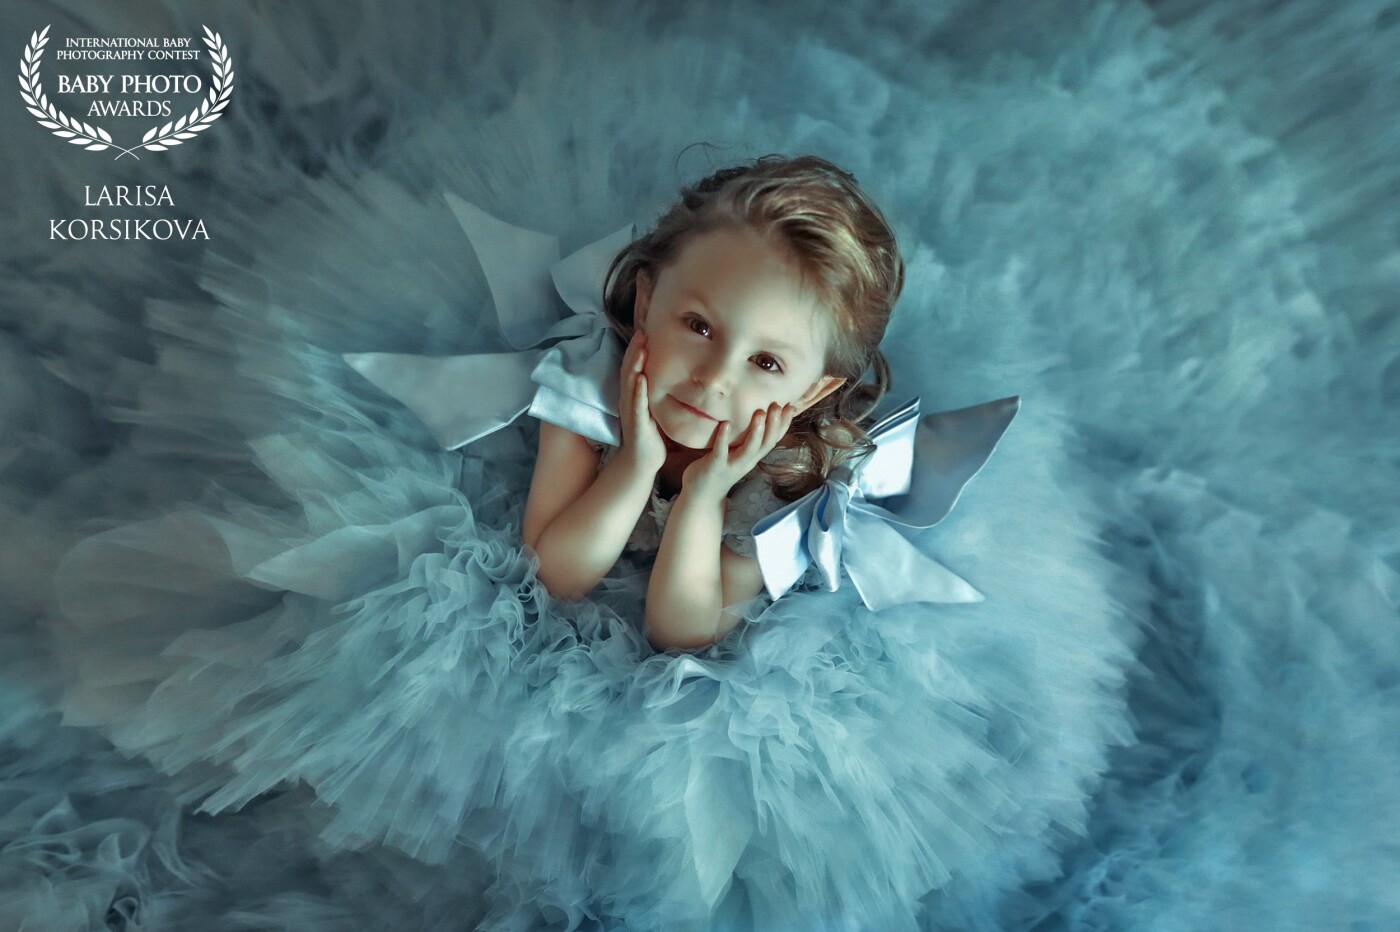 My little daughter Aurora loves to play a princess and I asked her to pose for me so I could take a picture of her with this beautiful blue dress.